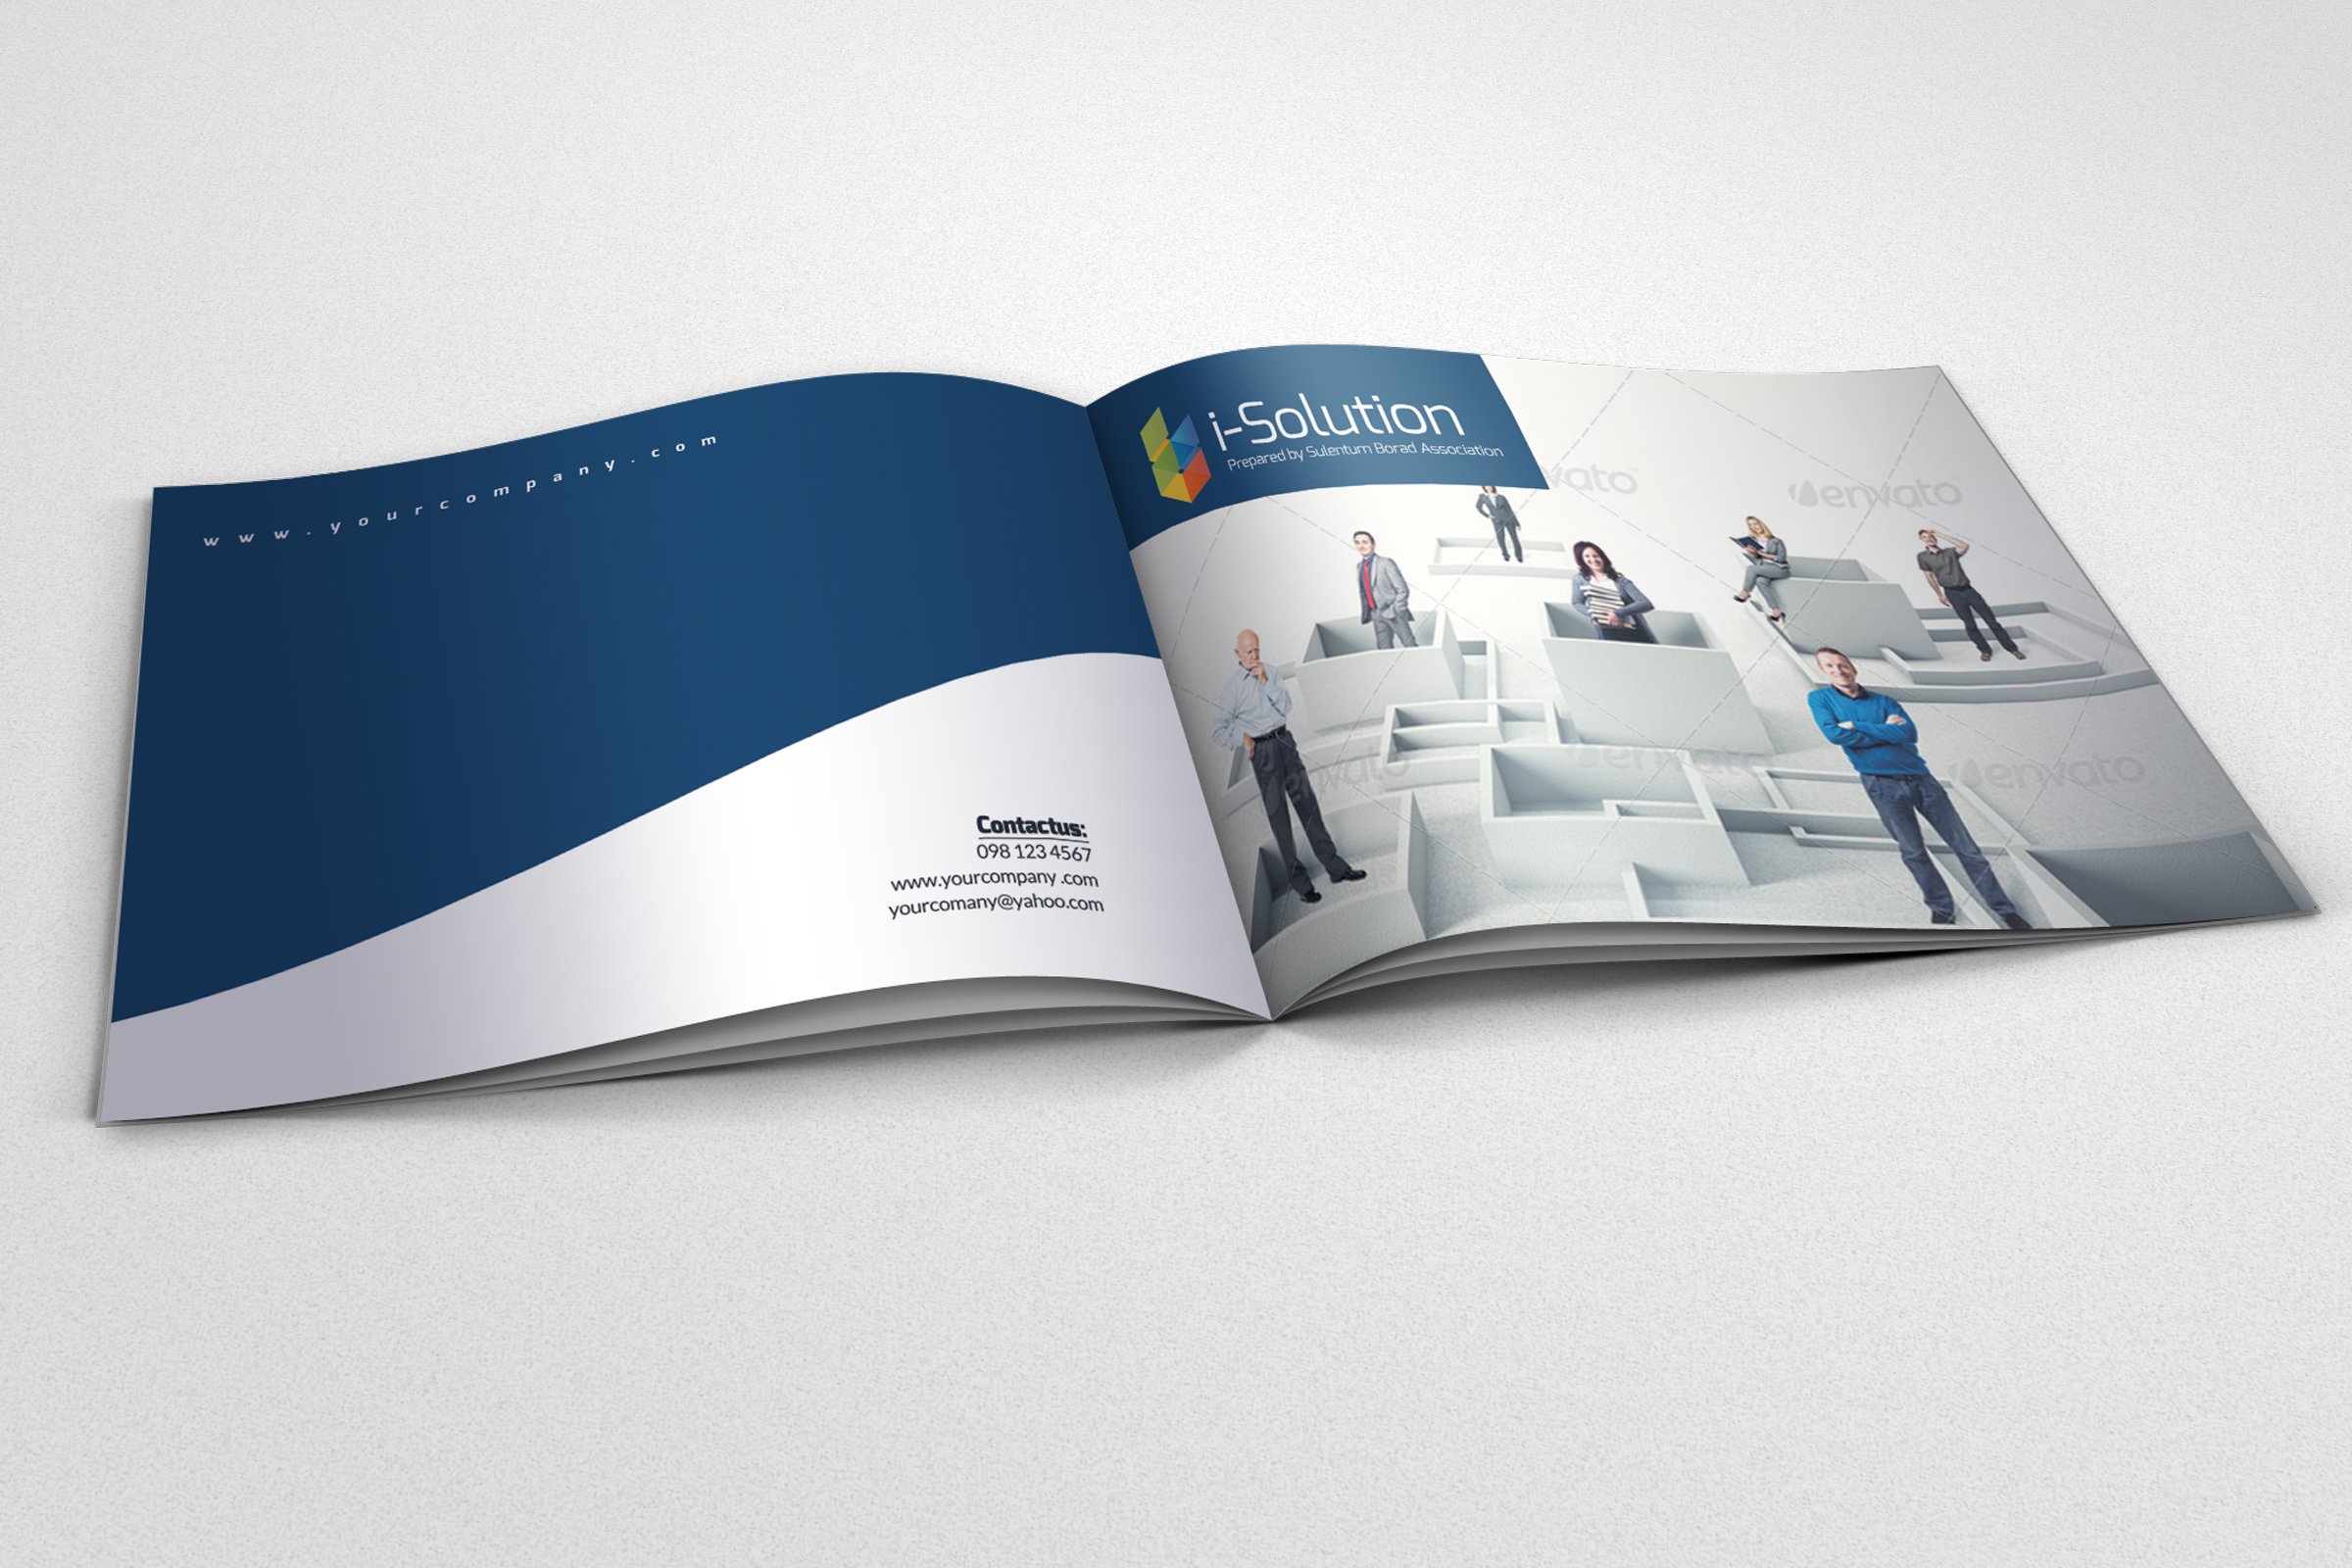 4 Pages Business Bi Fold Brochure cover image.